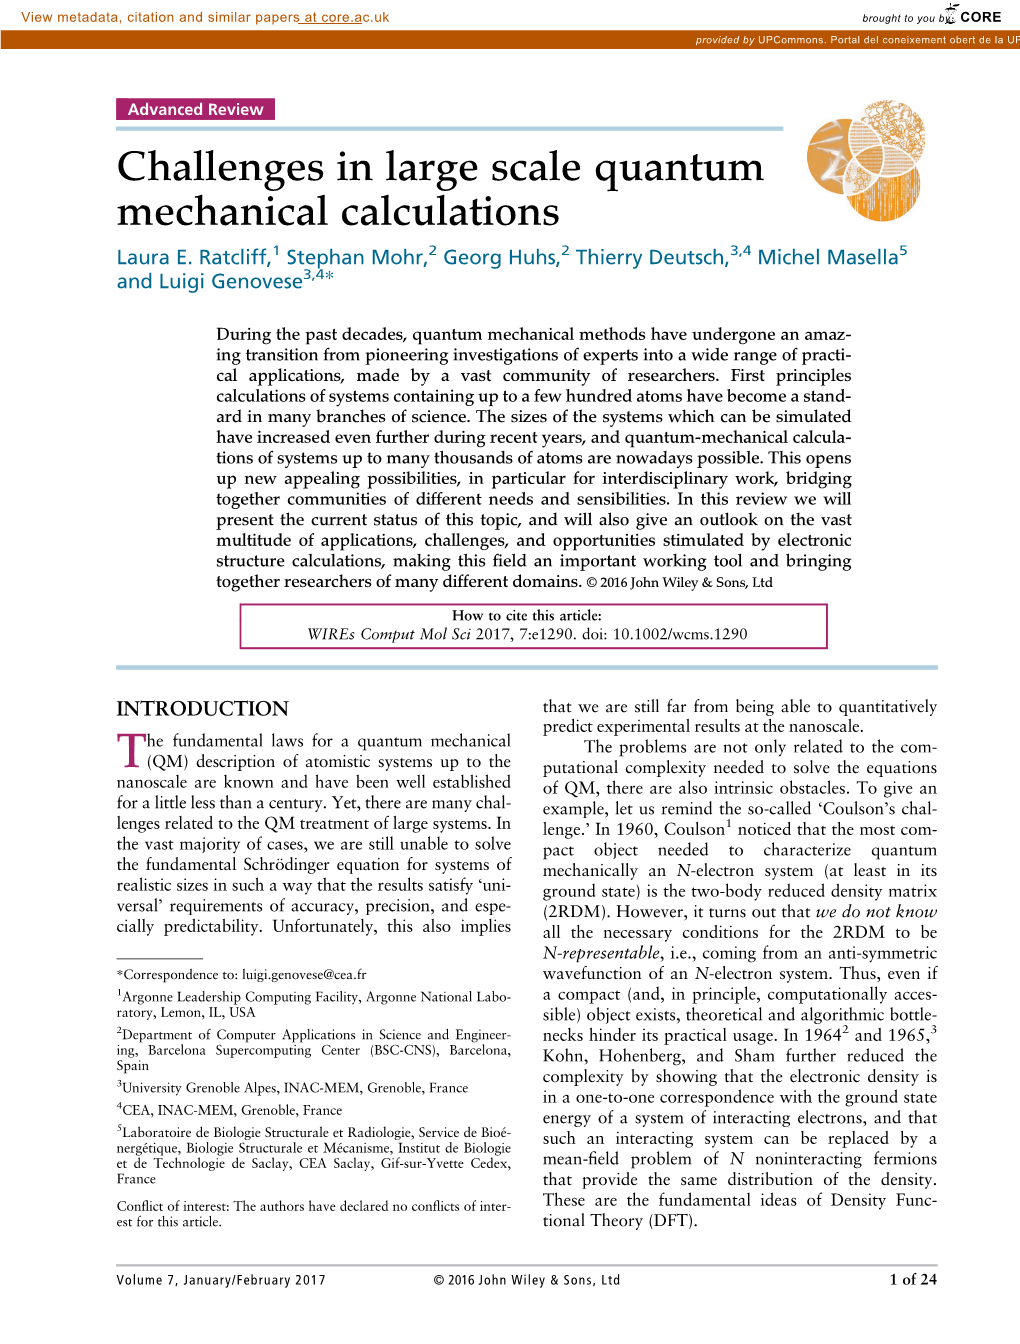 Challenges in Large Scale Quantum Mechanical Calculations